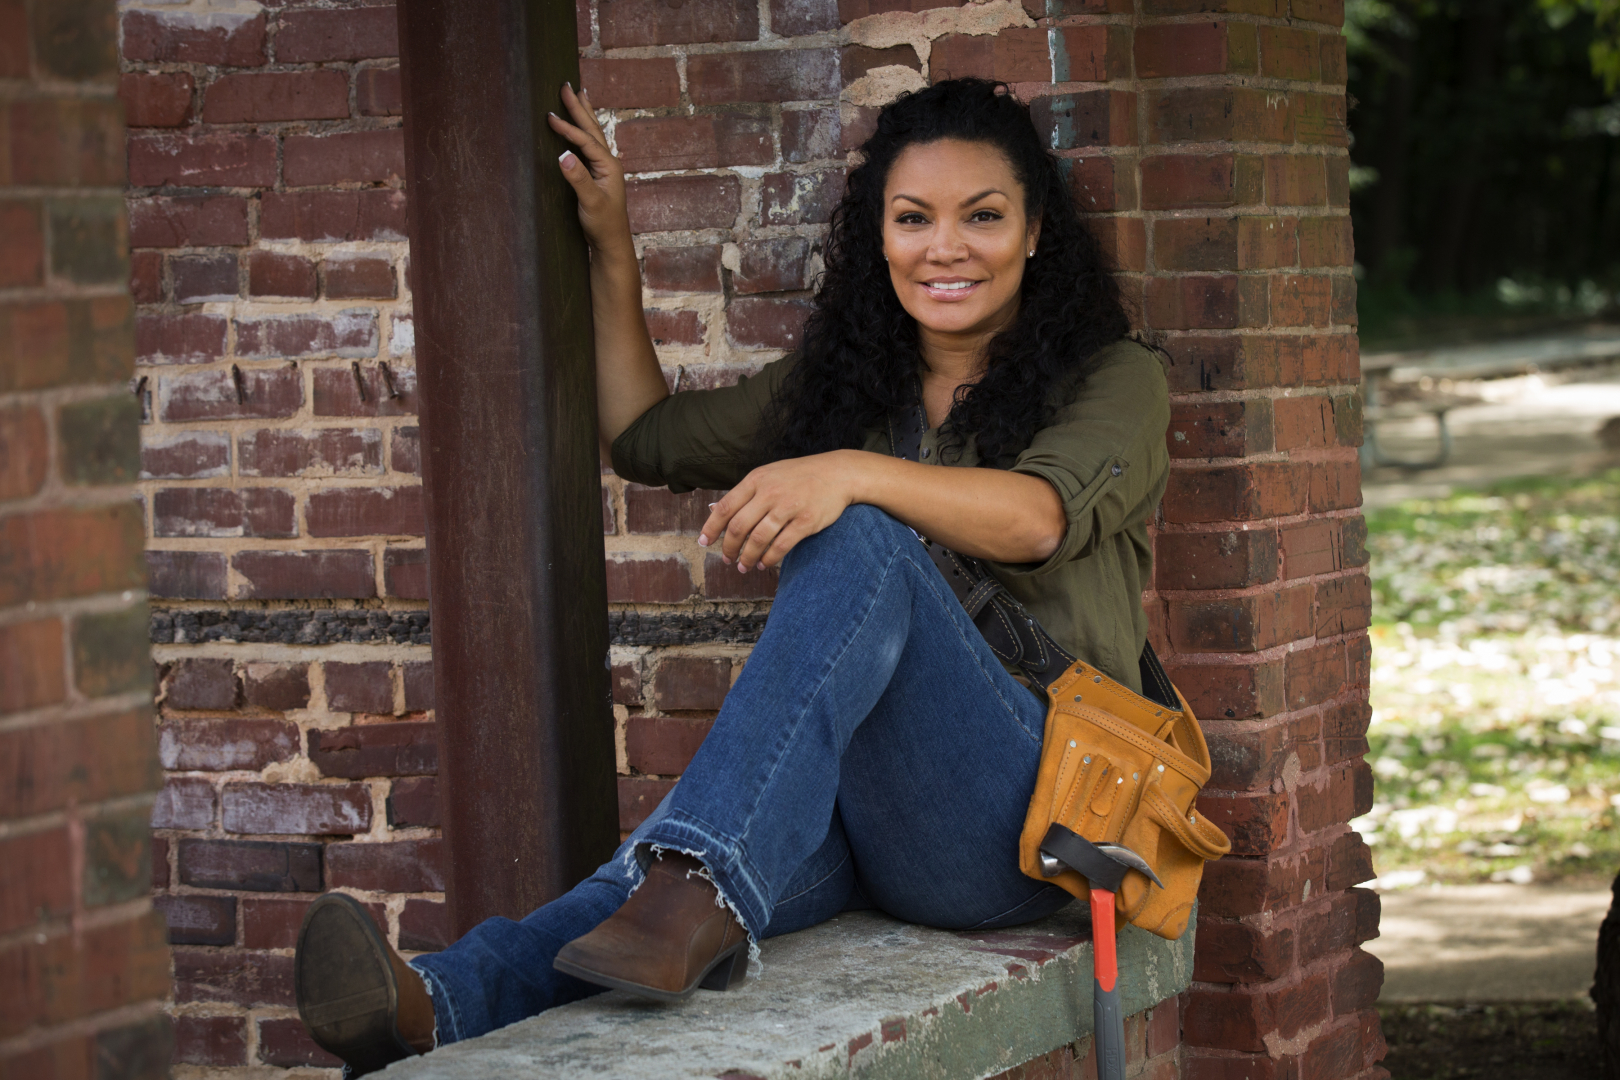 You may know Egypt Sherrod from HGTV’s "Flipping Virgins" and &qu...